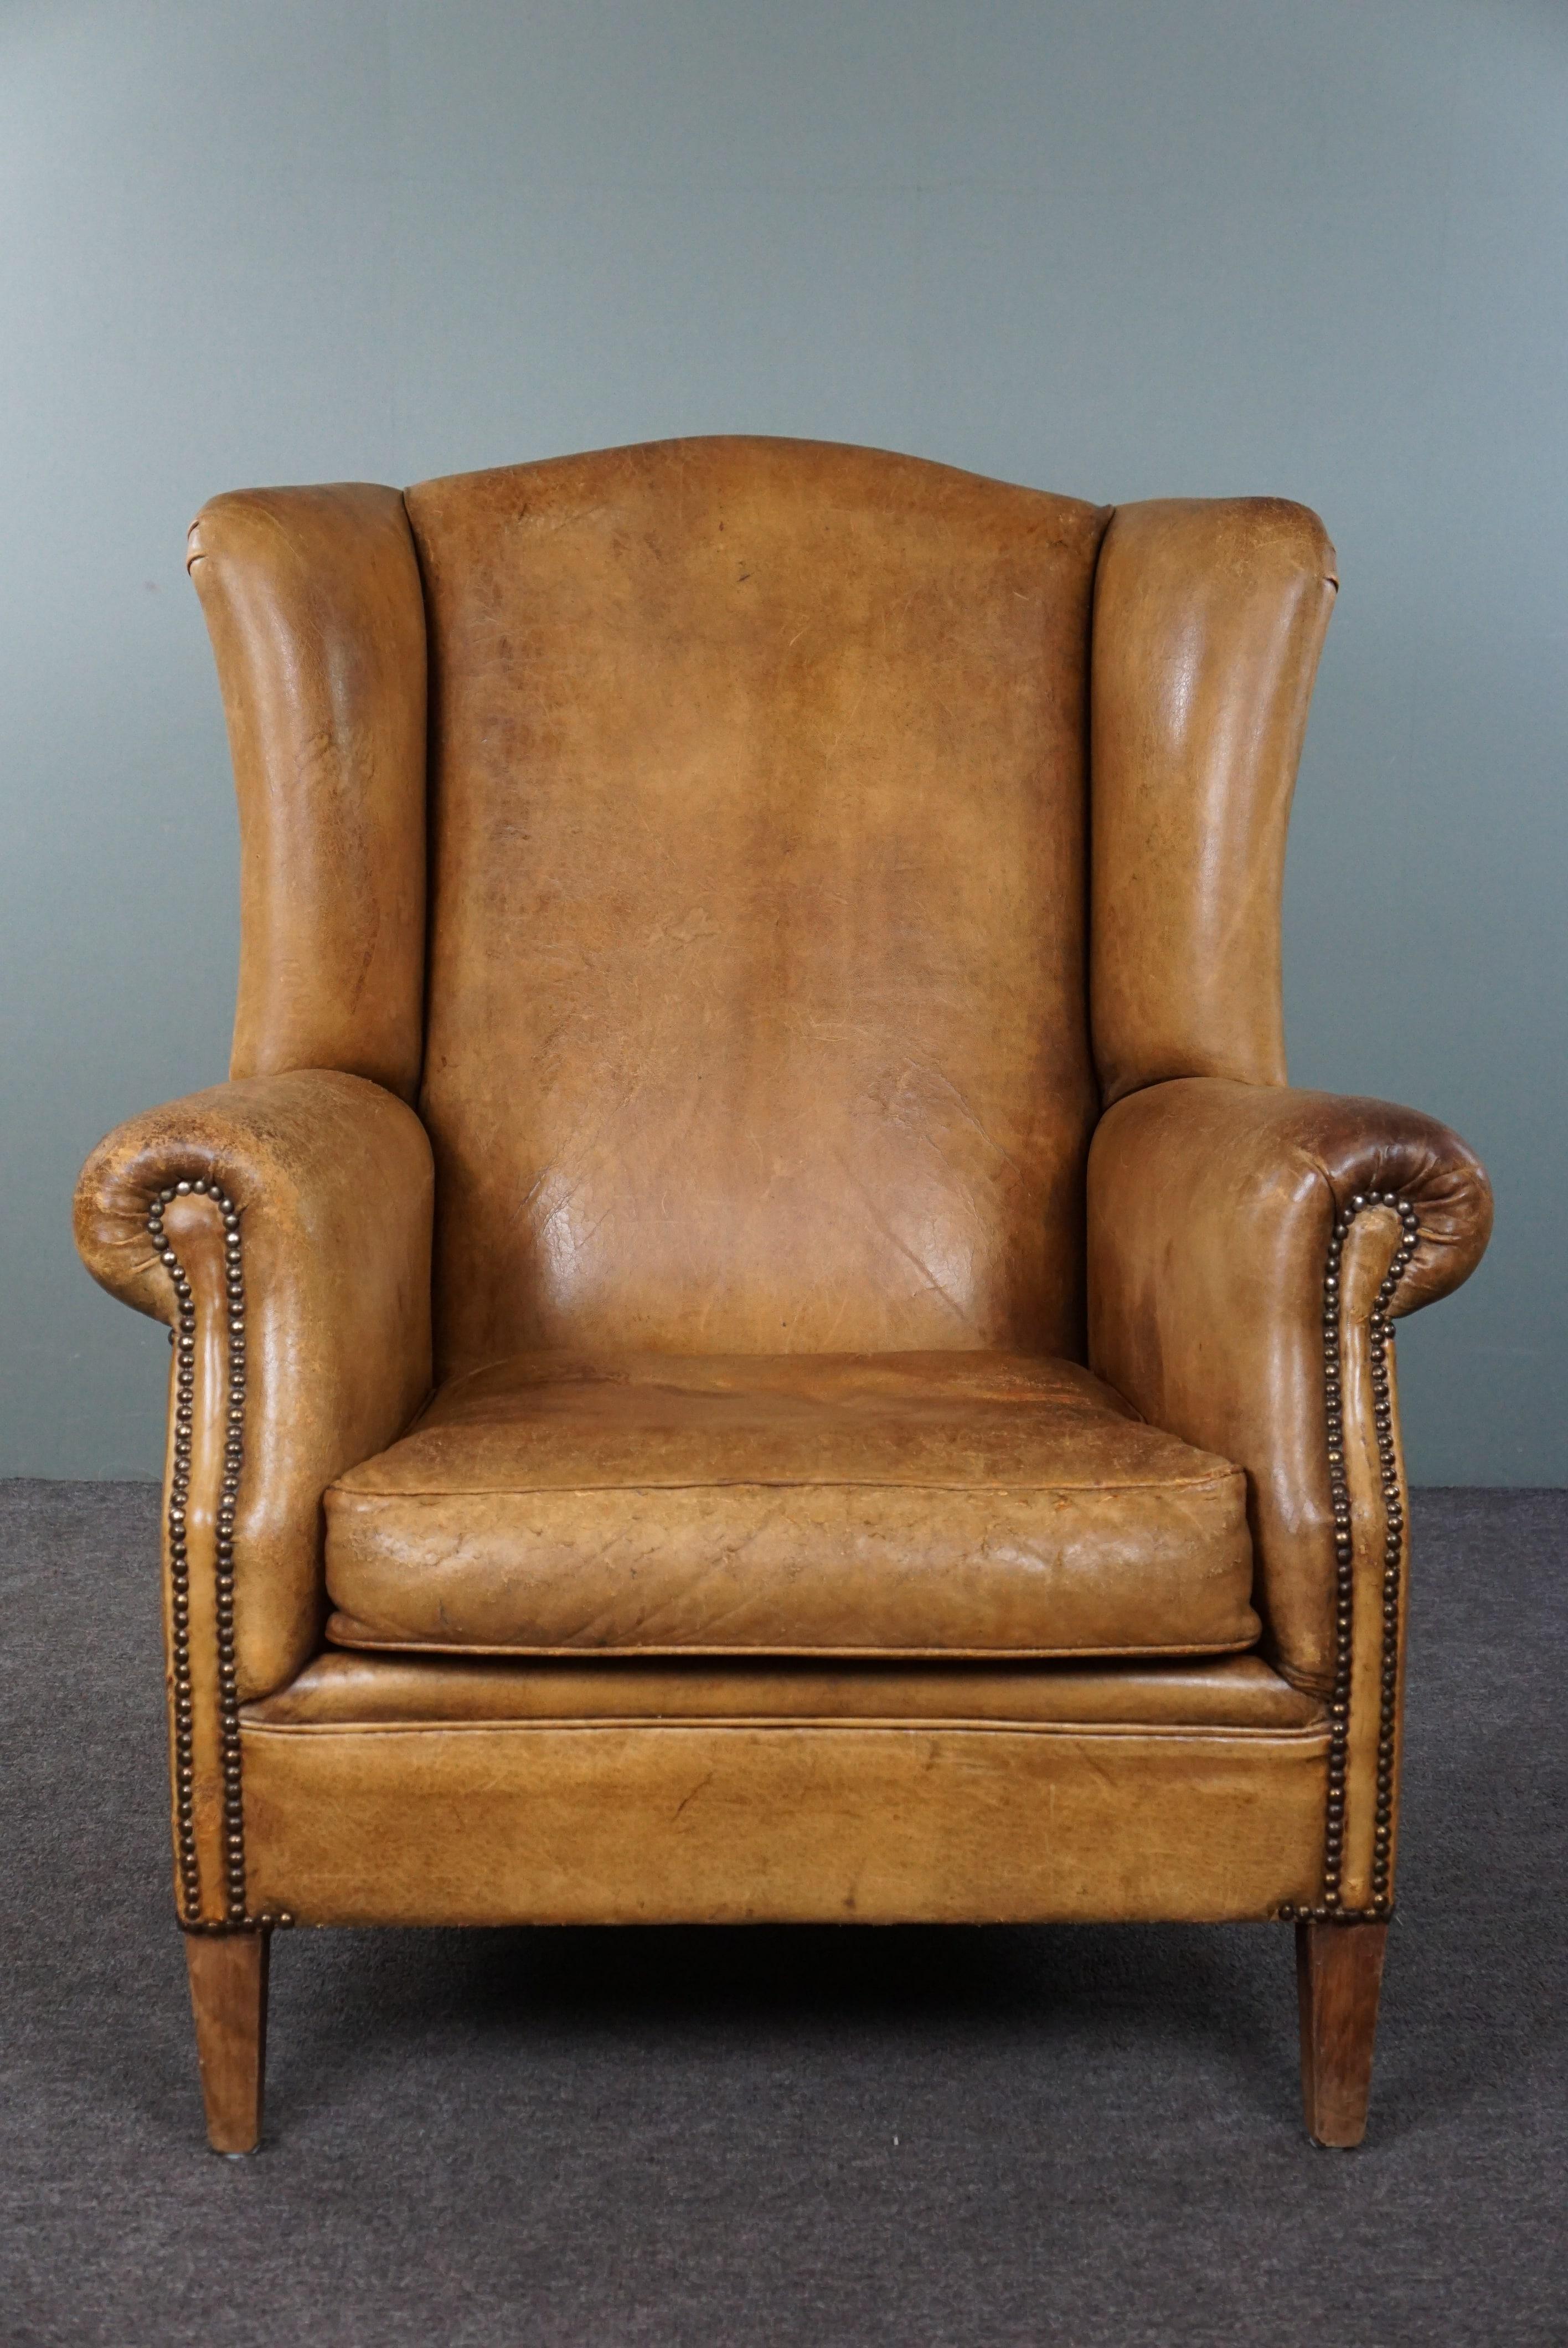 Offered is this perfectly worn-in, large sheepskin wingback chair in a light color. This beautiful, sizable wingback chair in a light cognac hue has an irresistibly lived-in appearance.
In typical English country-style interiors, you often see